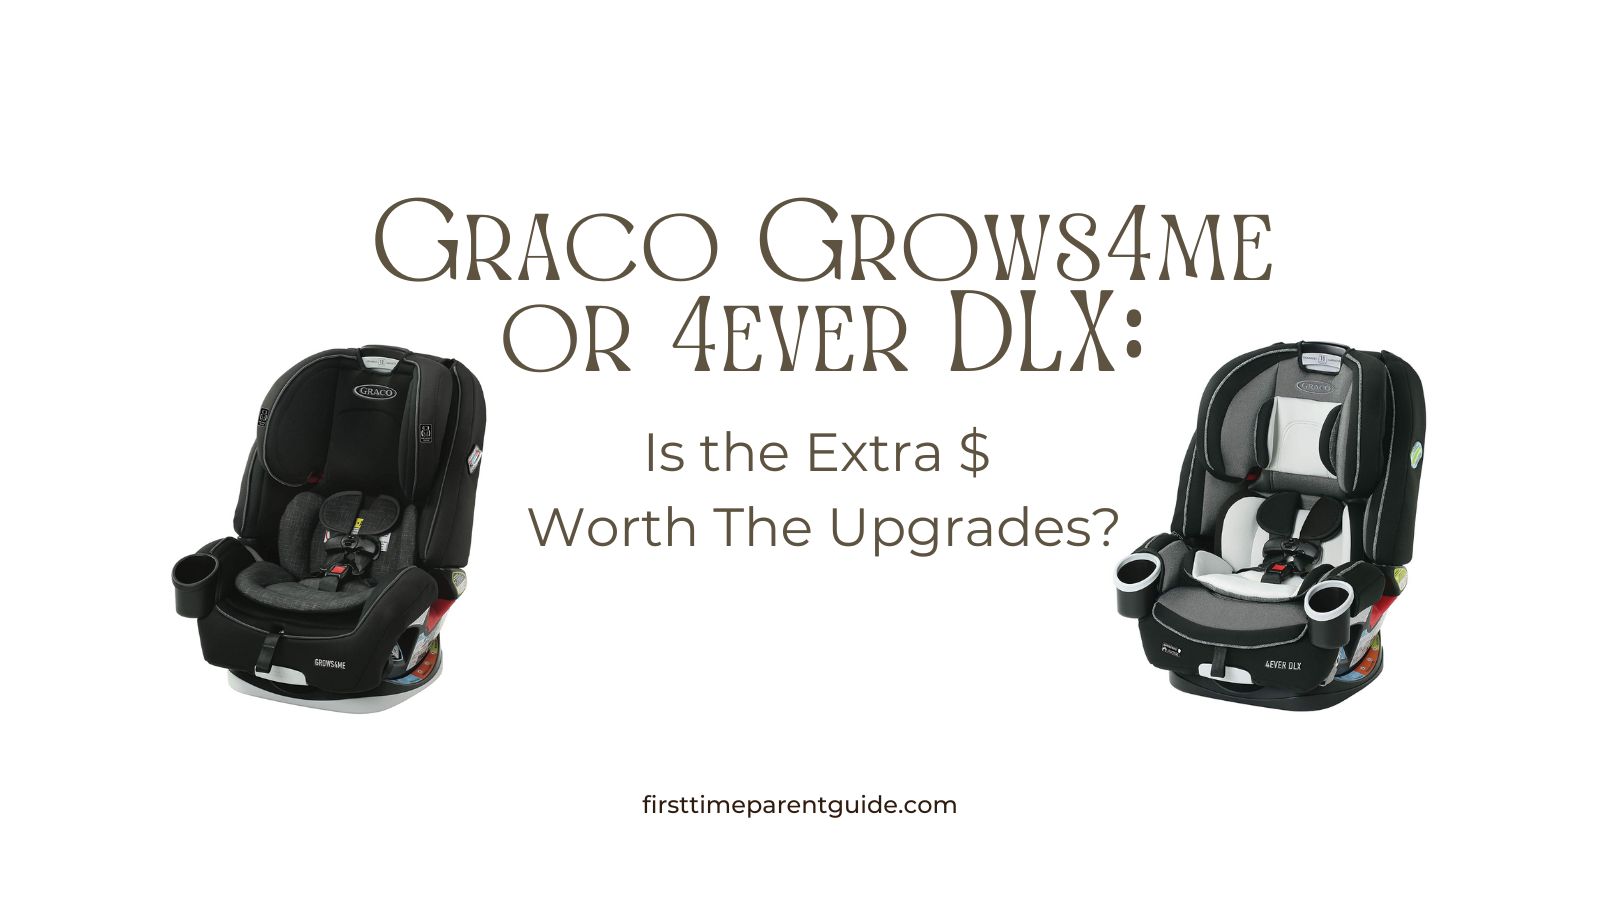 Graco Grows4me or